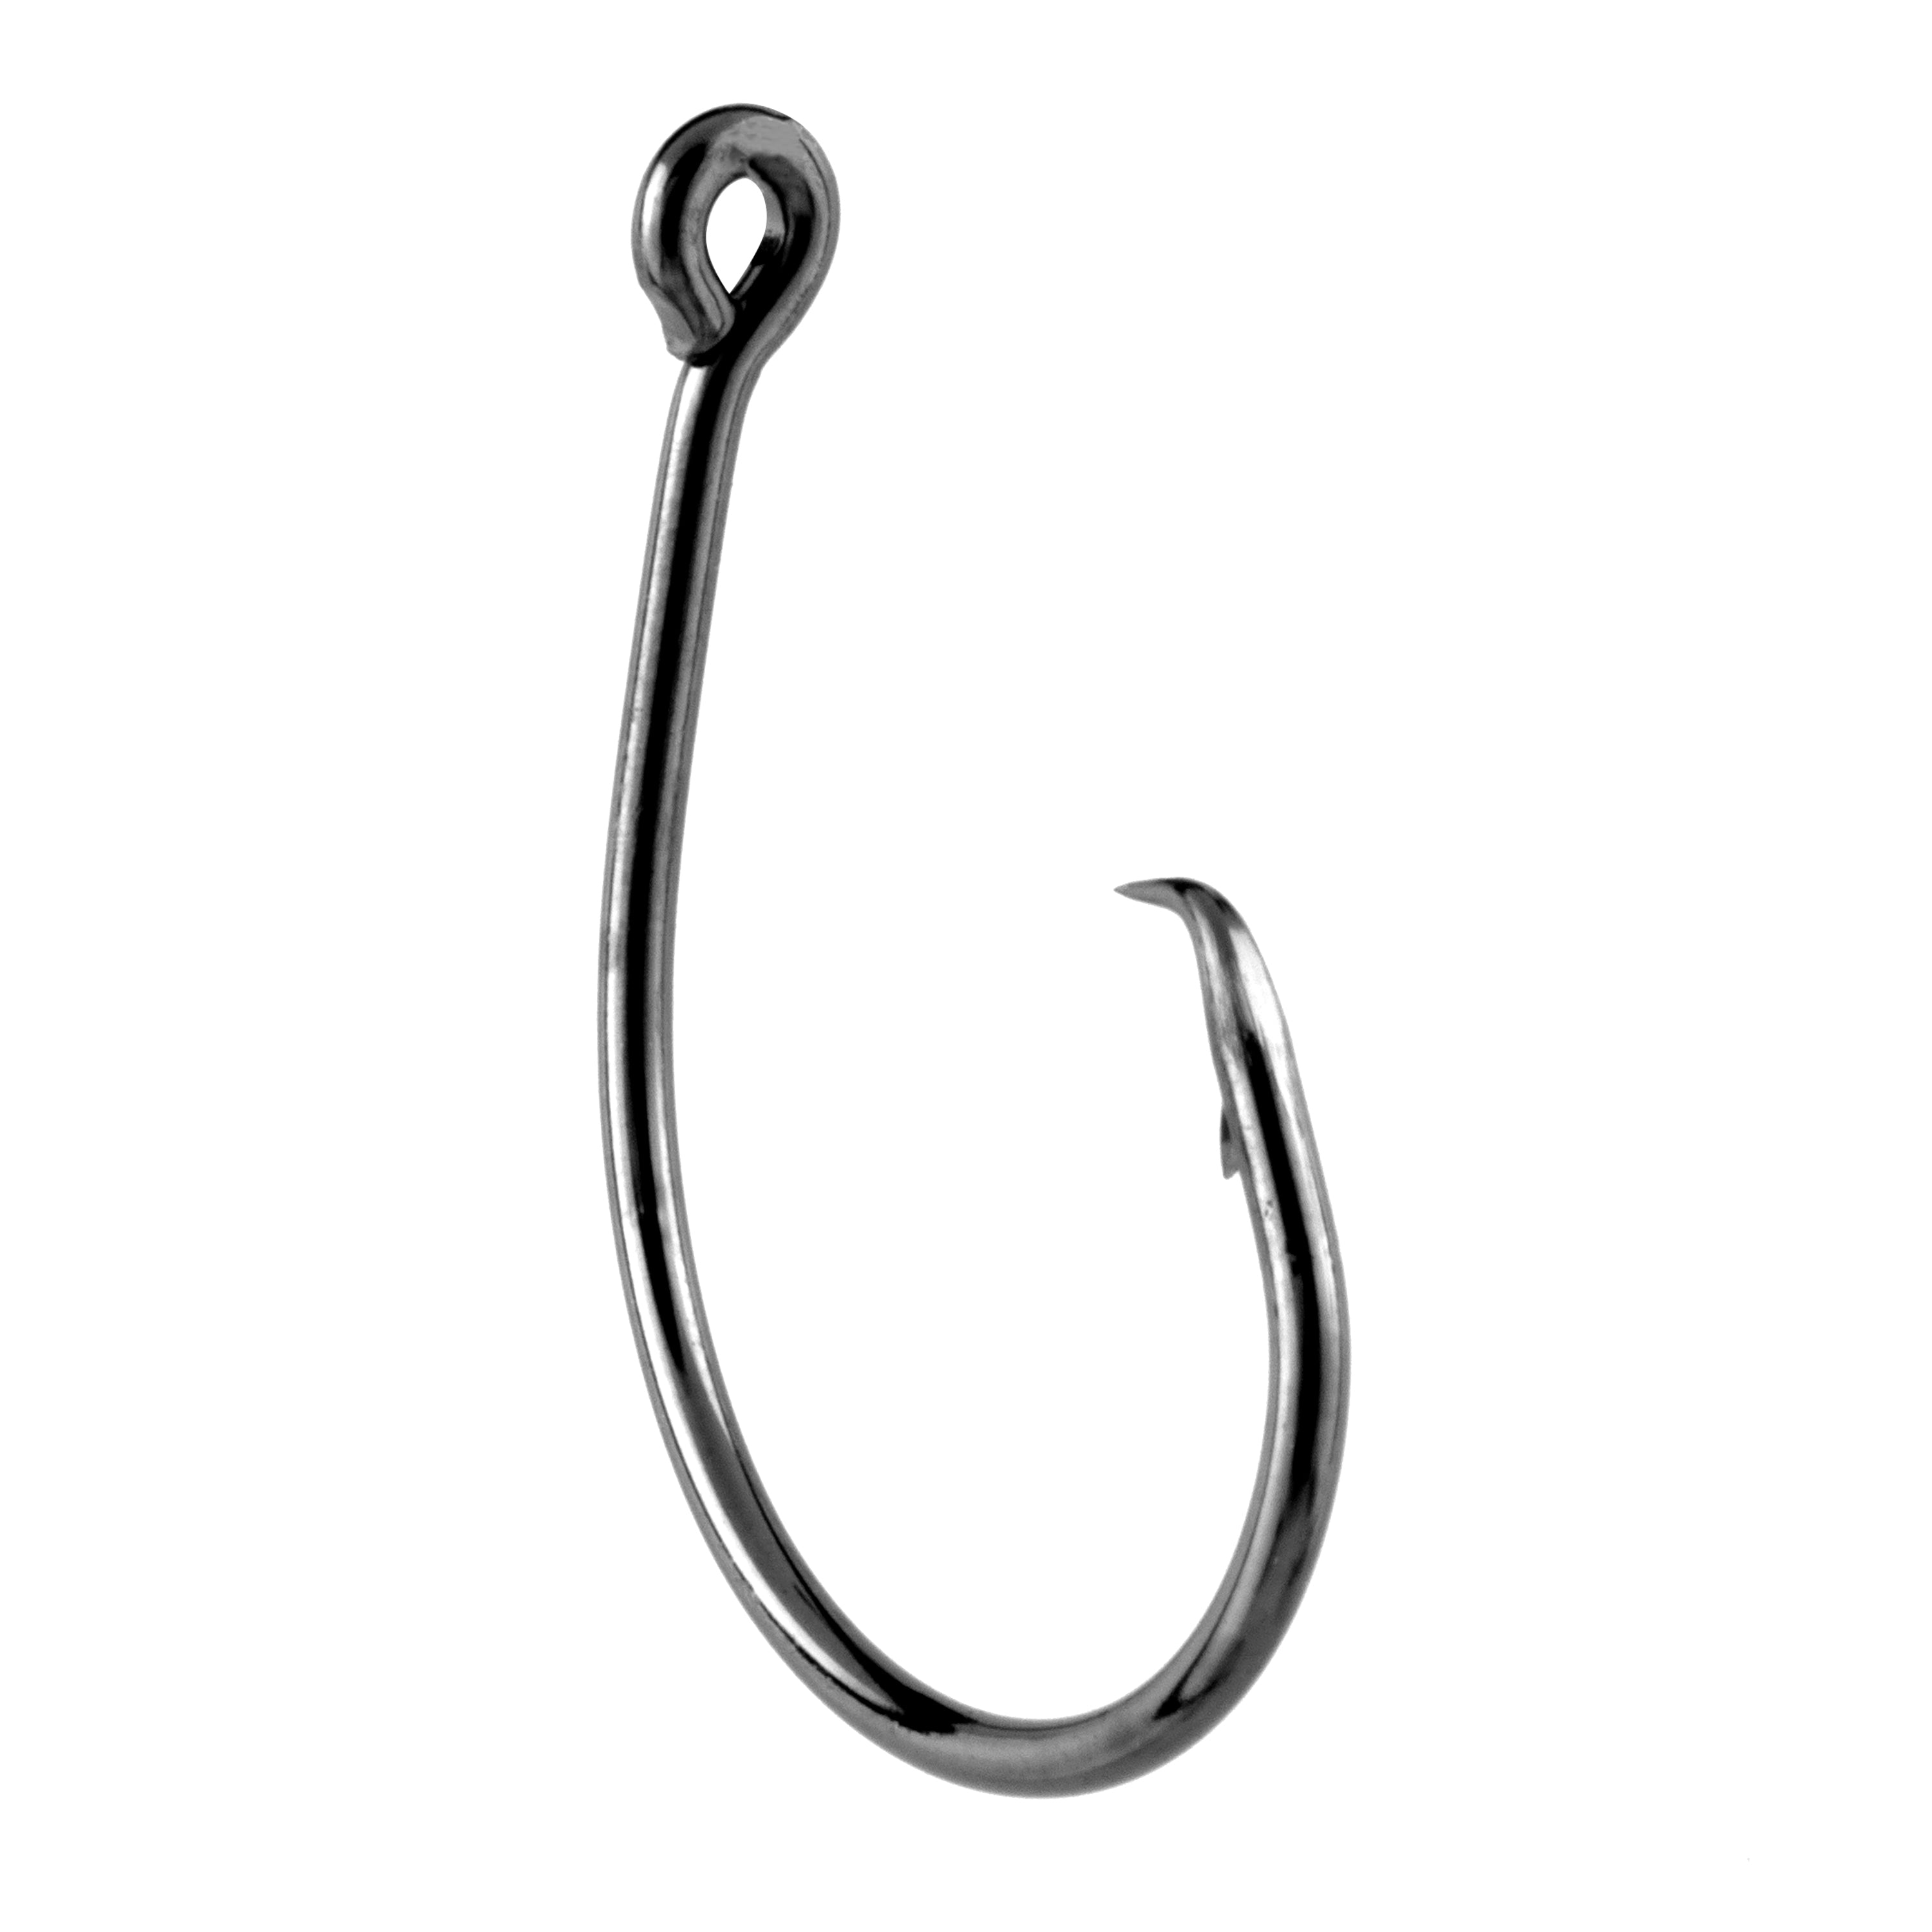 Inline Perfect Circle Hook Guide Pack